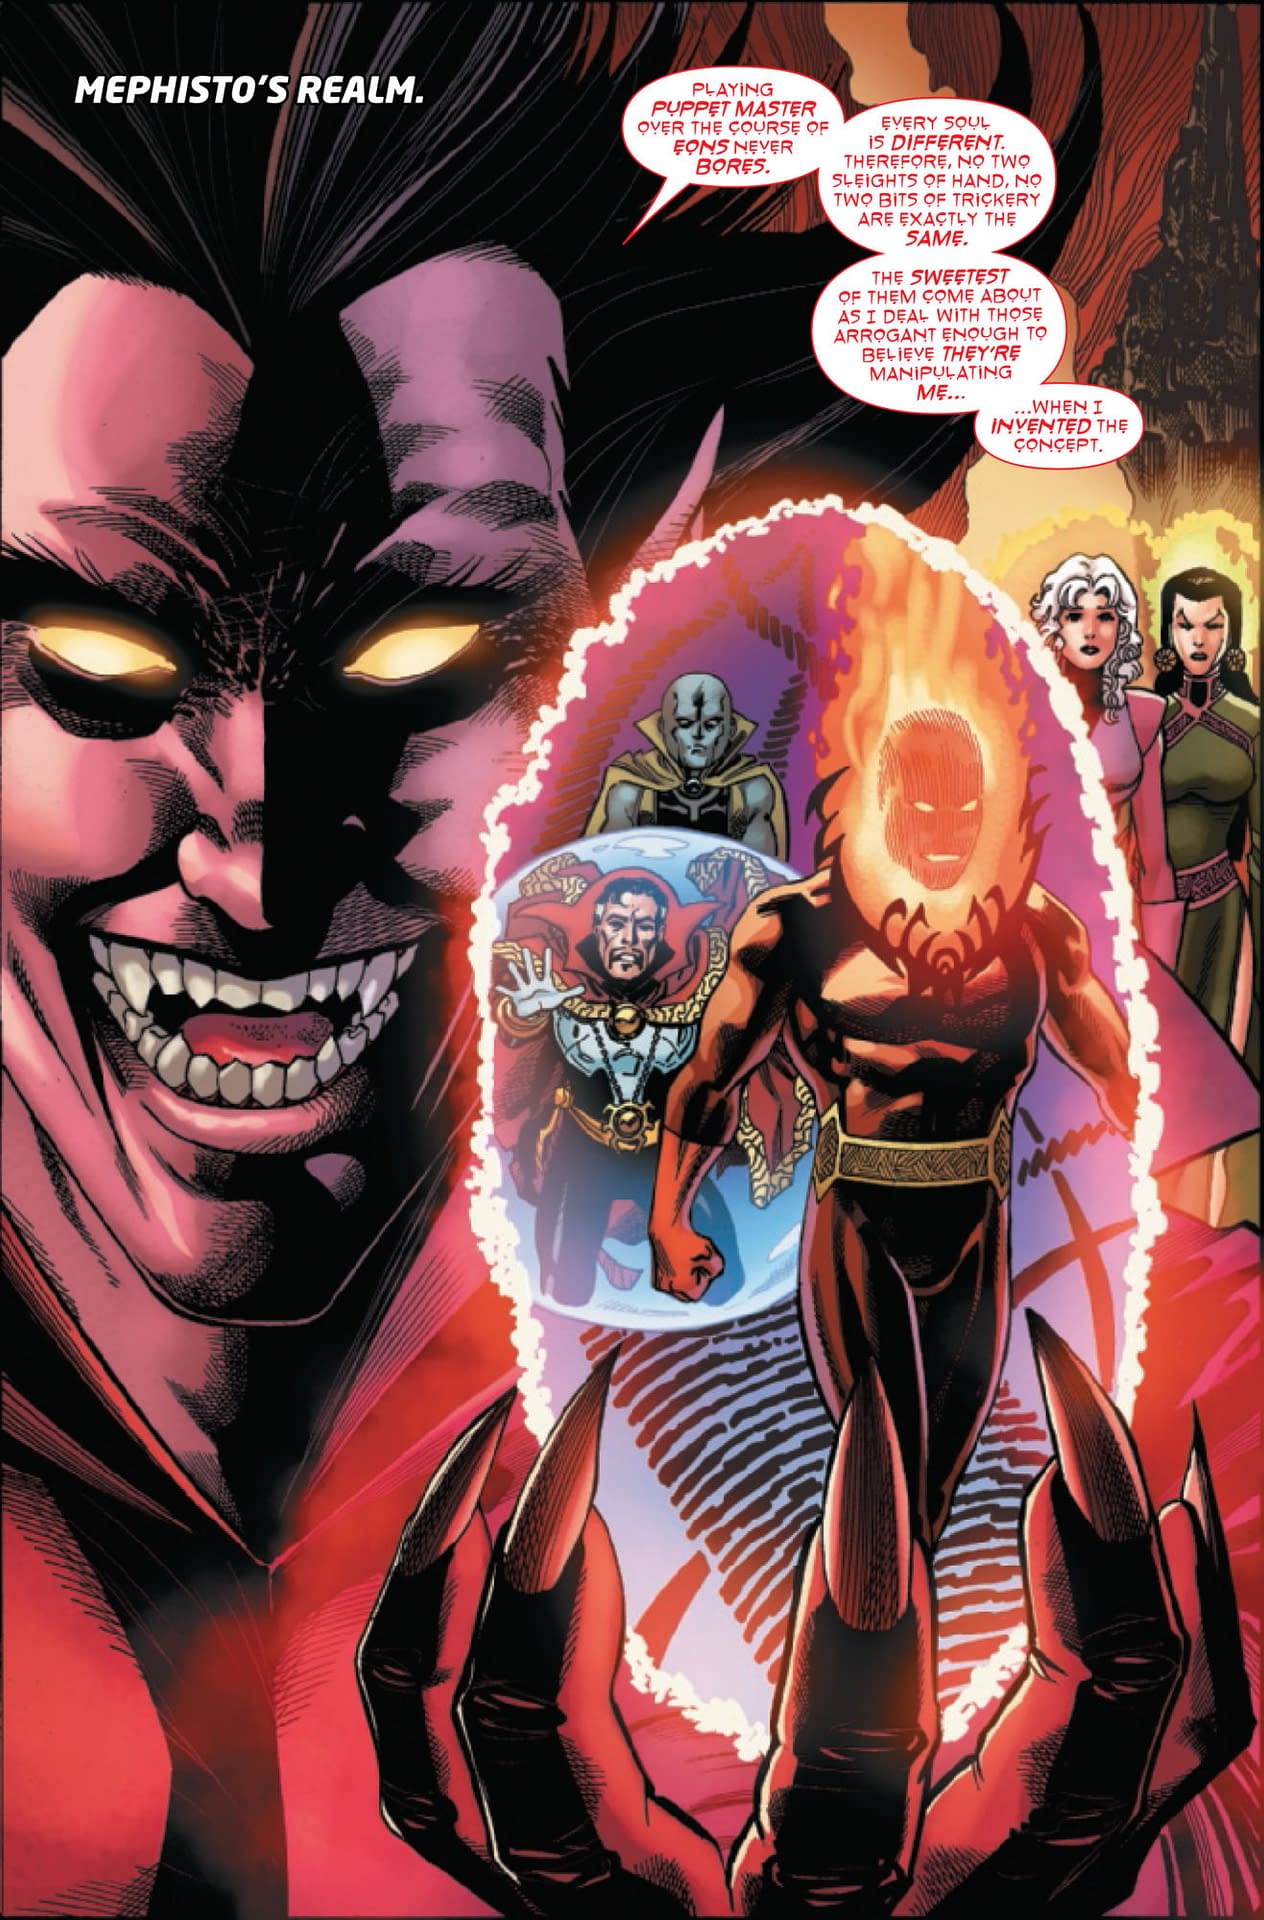 Messing With Dormammu in Doctor Strange #15 (Preview)